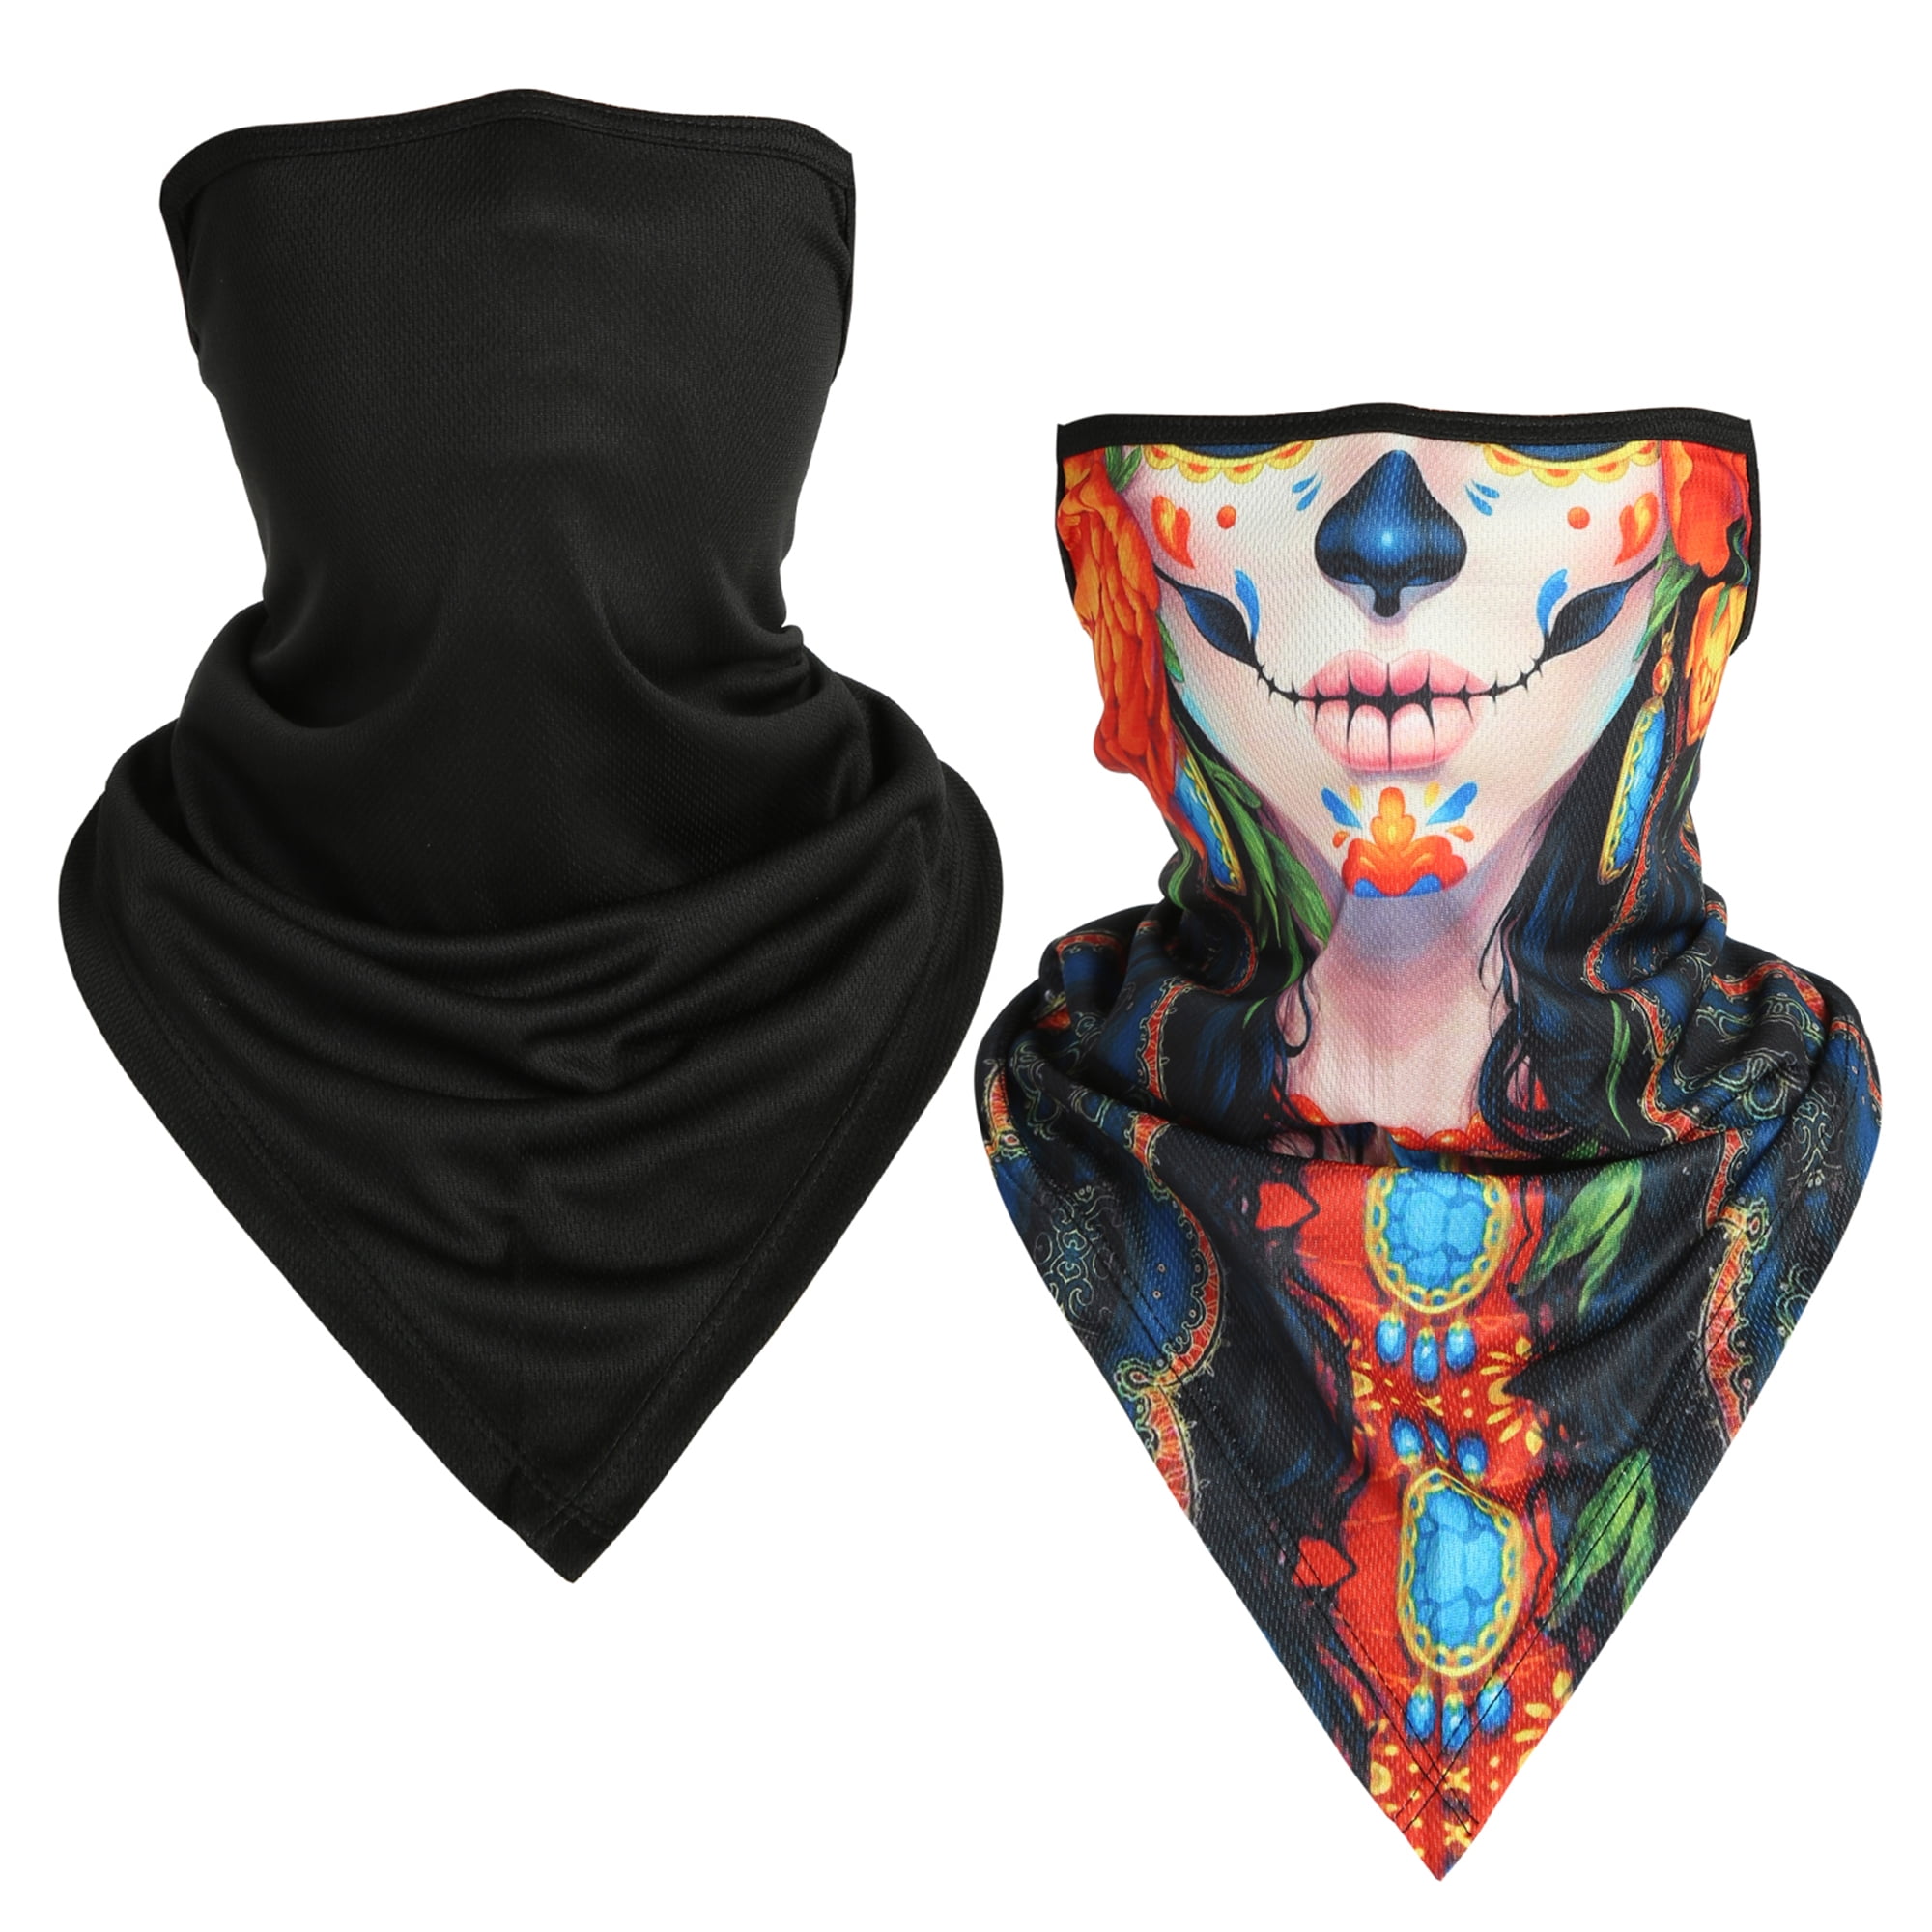 Details about   Cooling Neck Gaiter UV Protection Breathable Face Mask Scarf Bandana Balaclava 